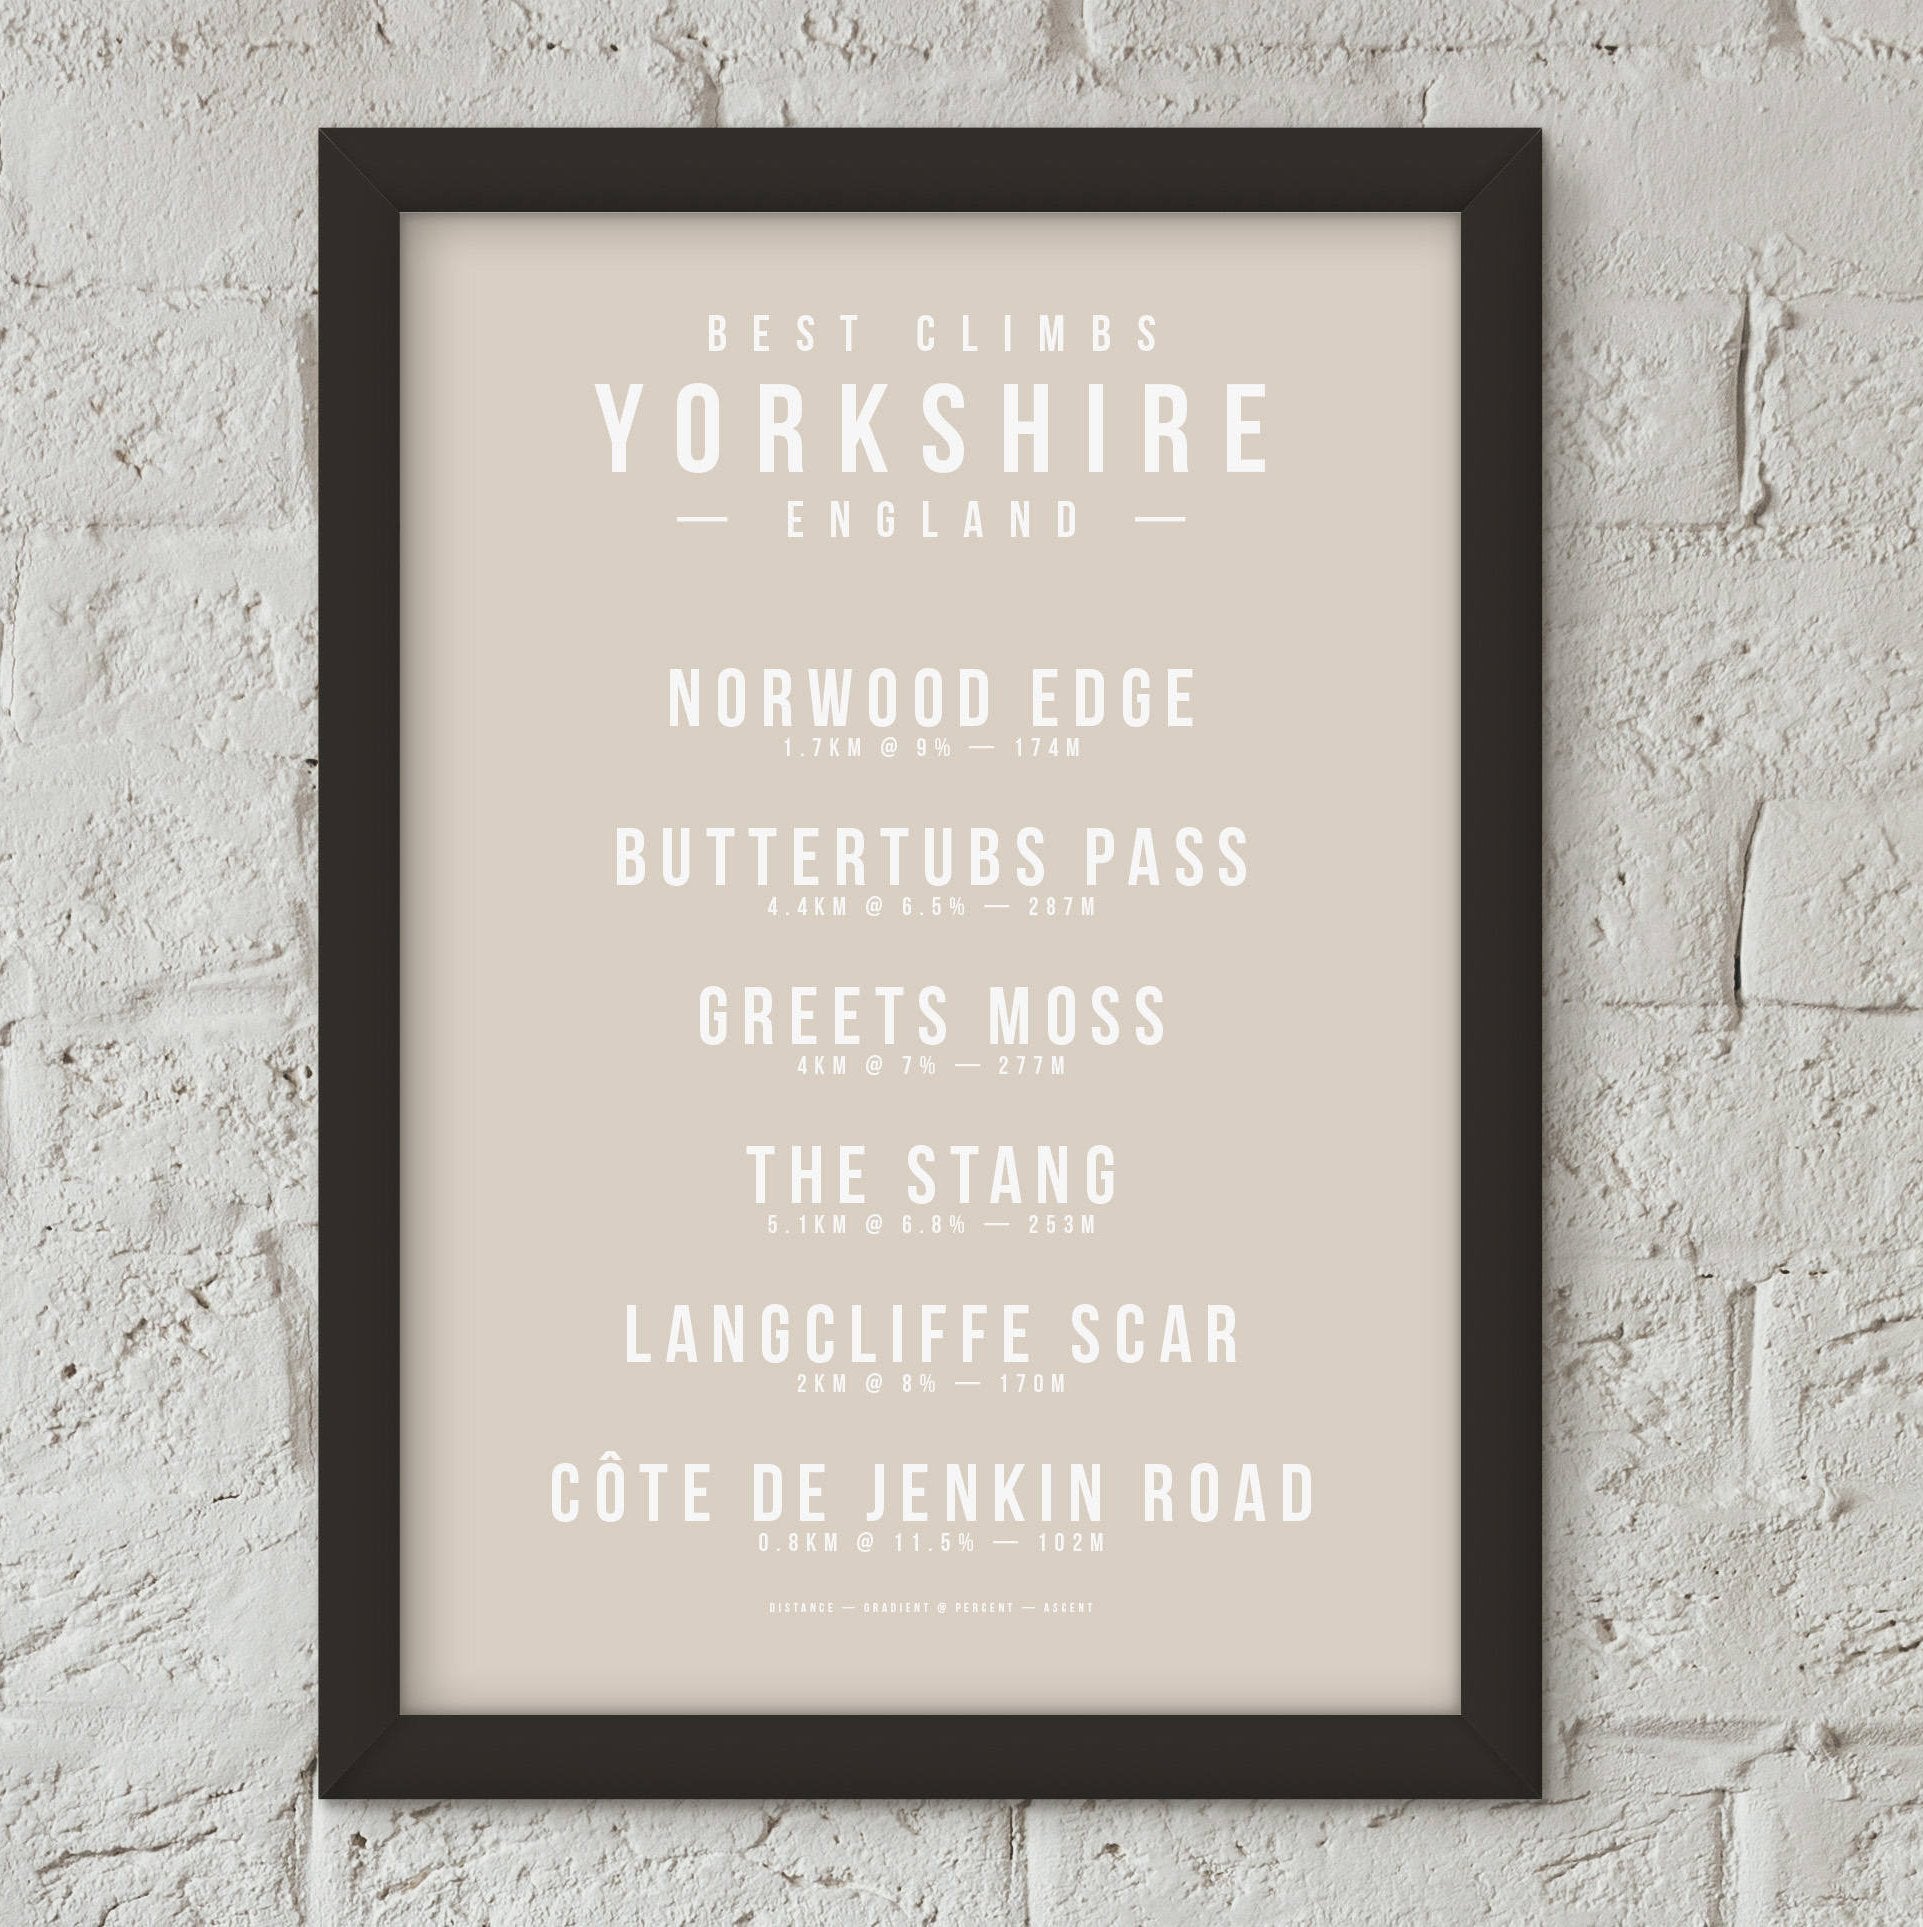 Climbs of Yorkshire, England – Poster – The English Cyclist